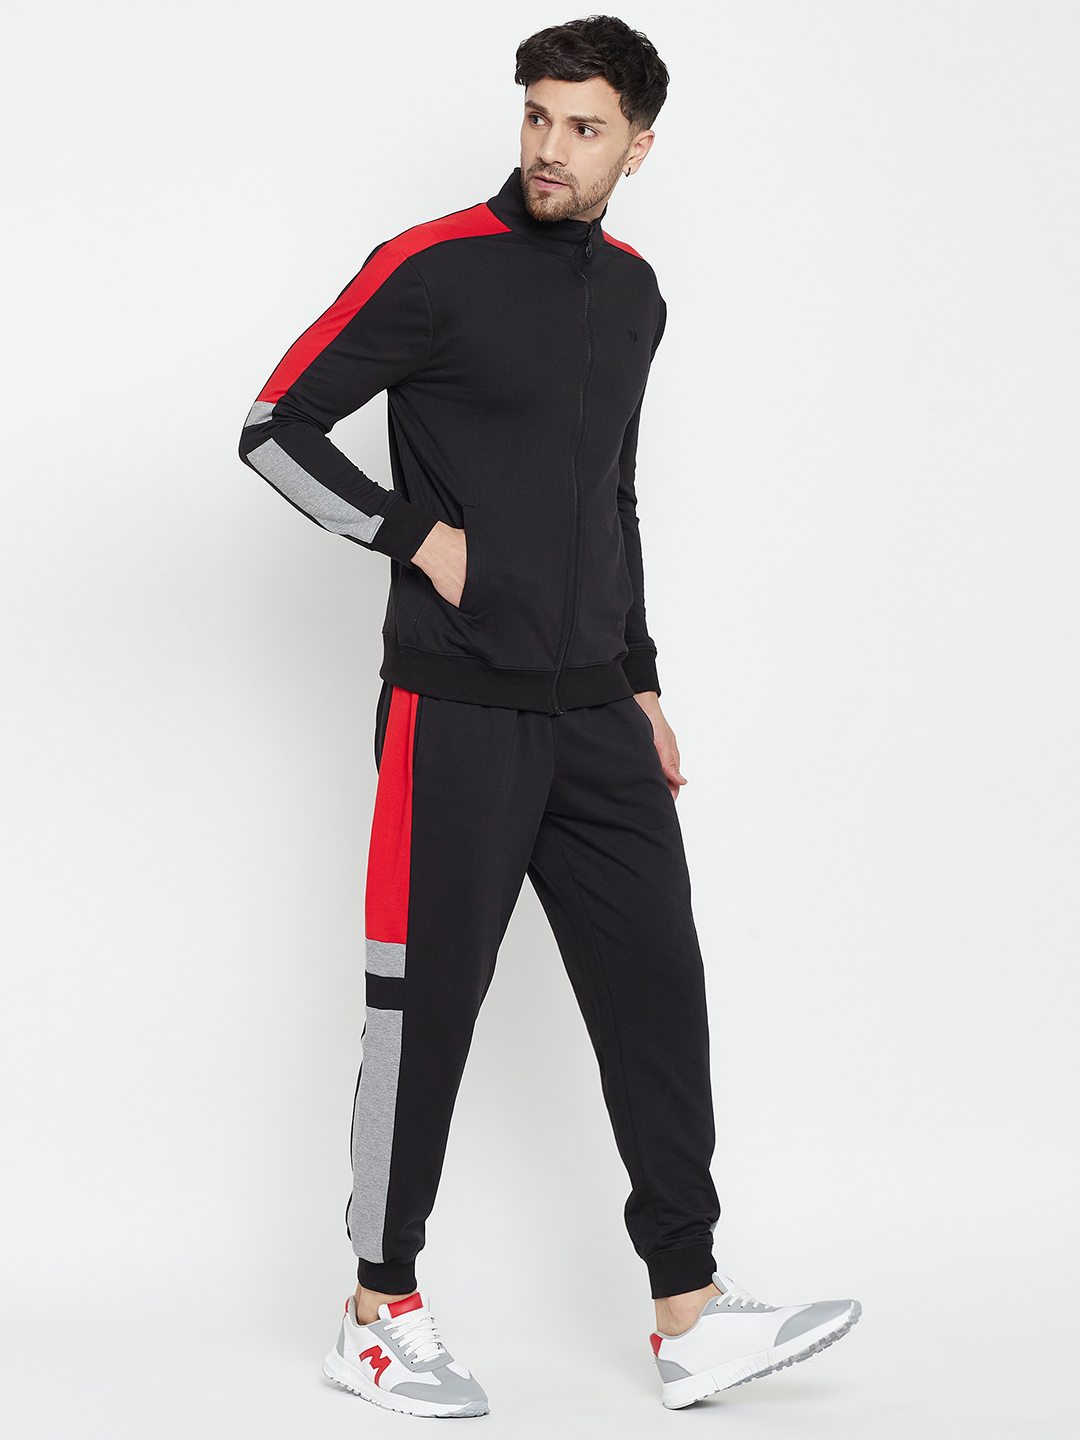 Triadic Trachsuit-Red/Light Grey - T10 Sports